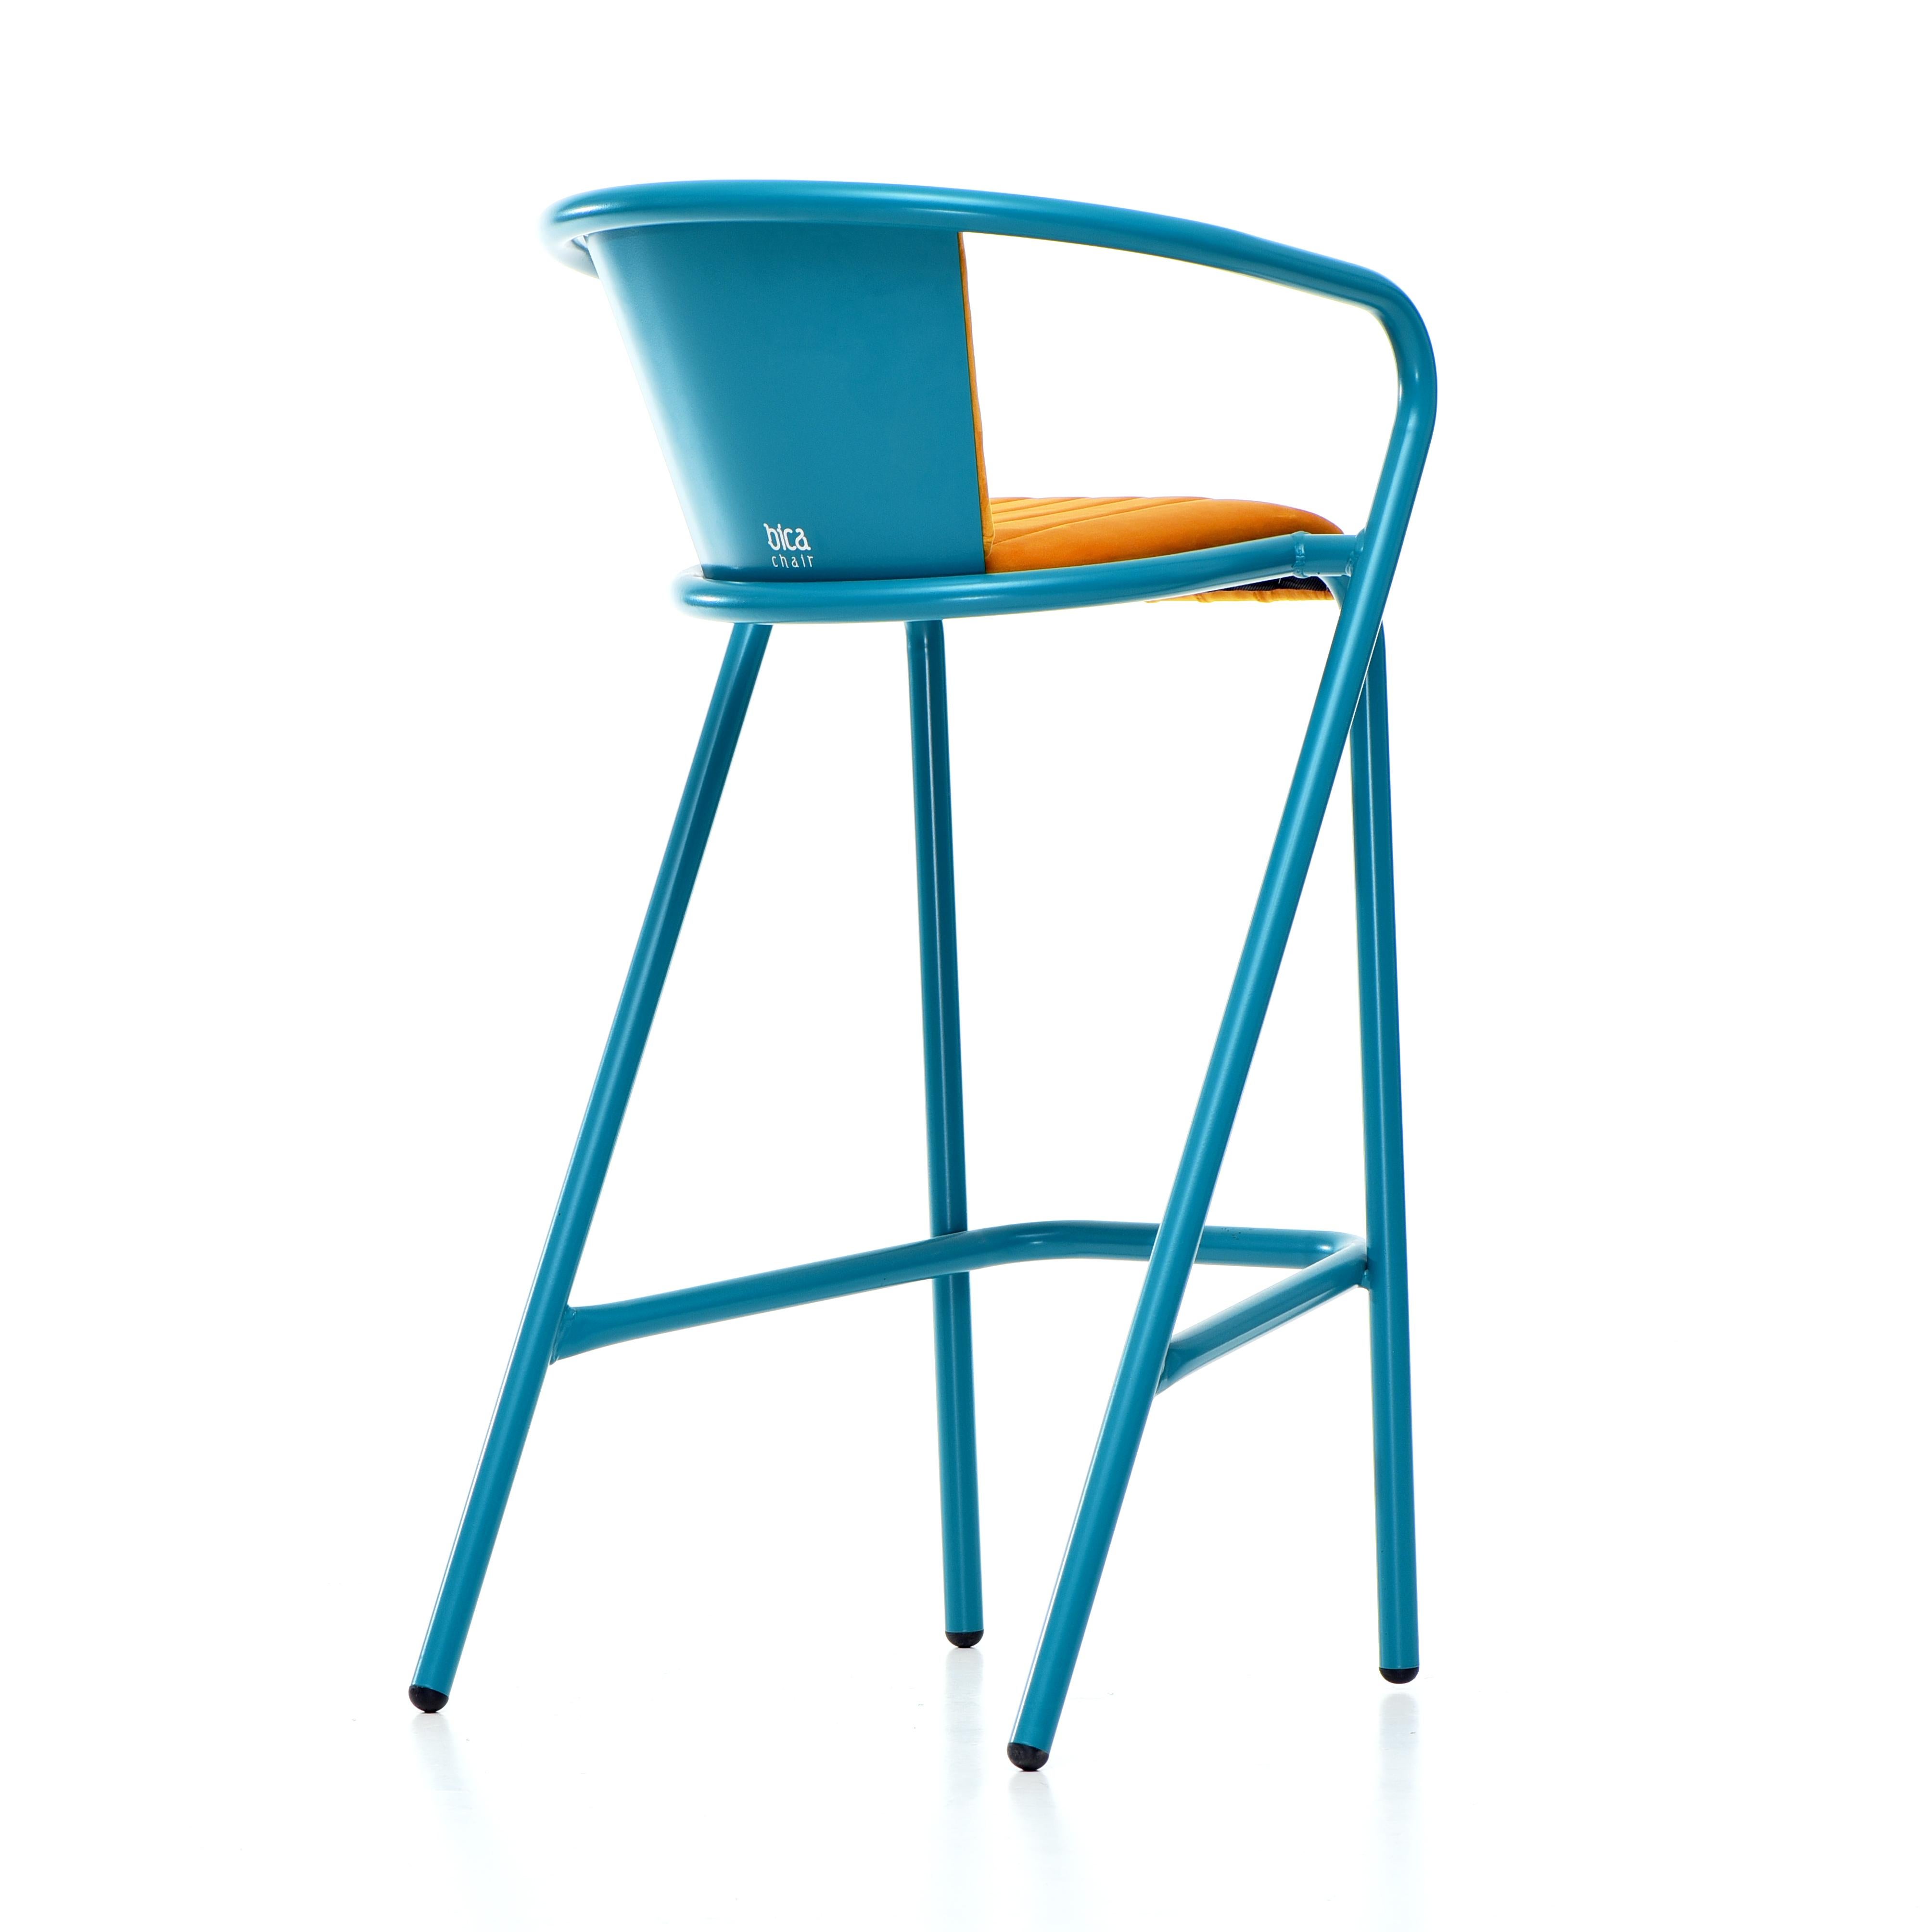 BICAstool Modern Steel High Stool Chair Water Blue, Upholstery in Soft Velvet In New Condition For Sale In Agualva-Cacém, PT